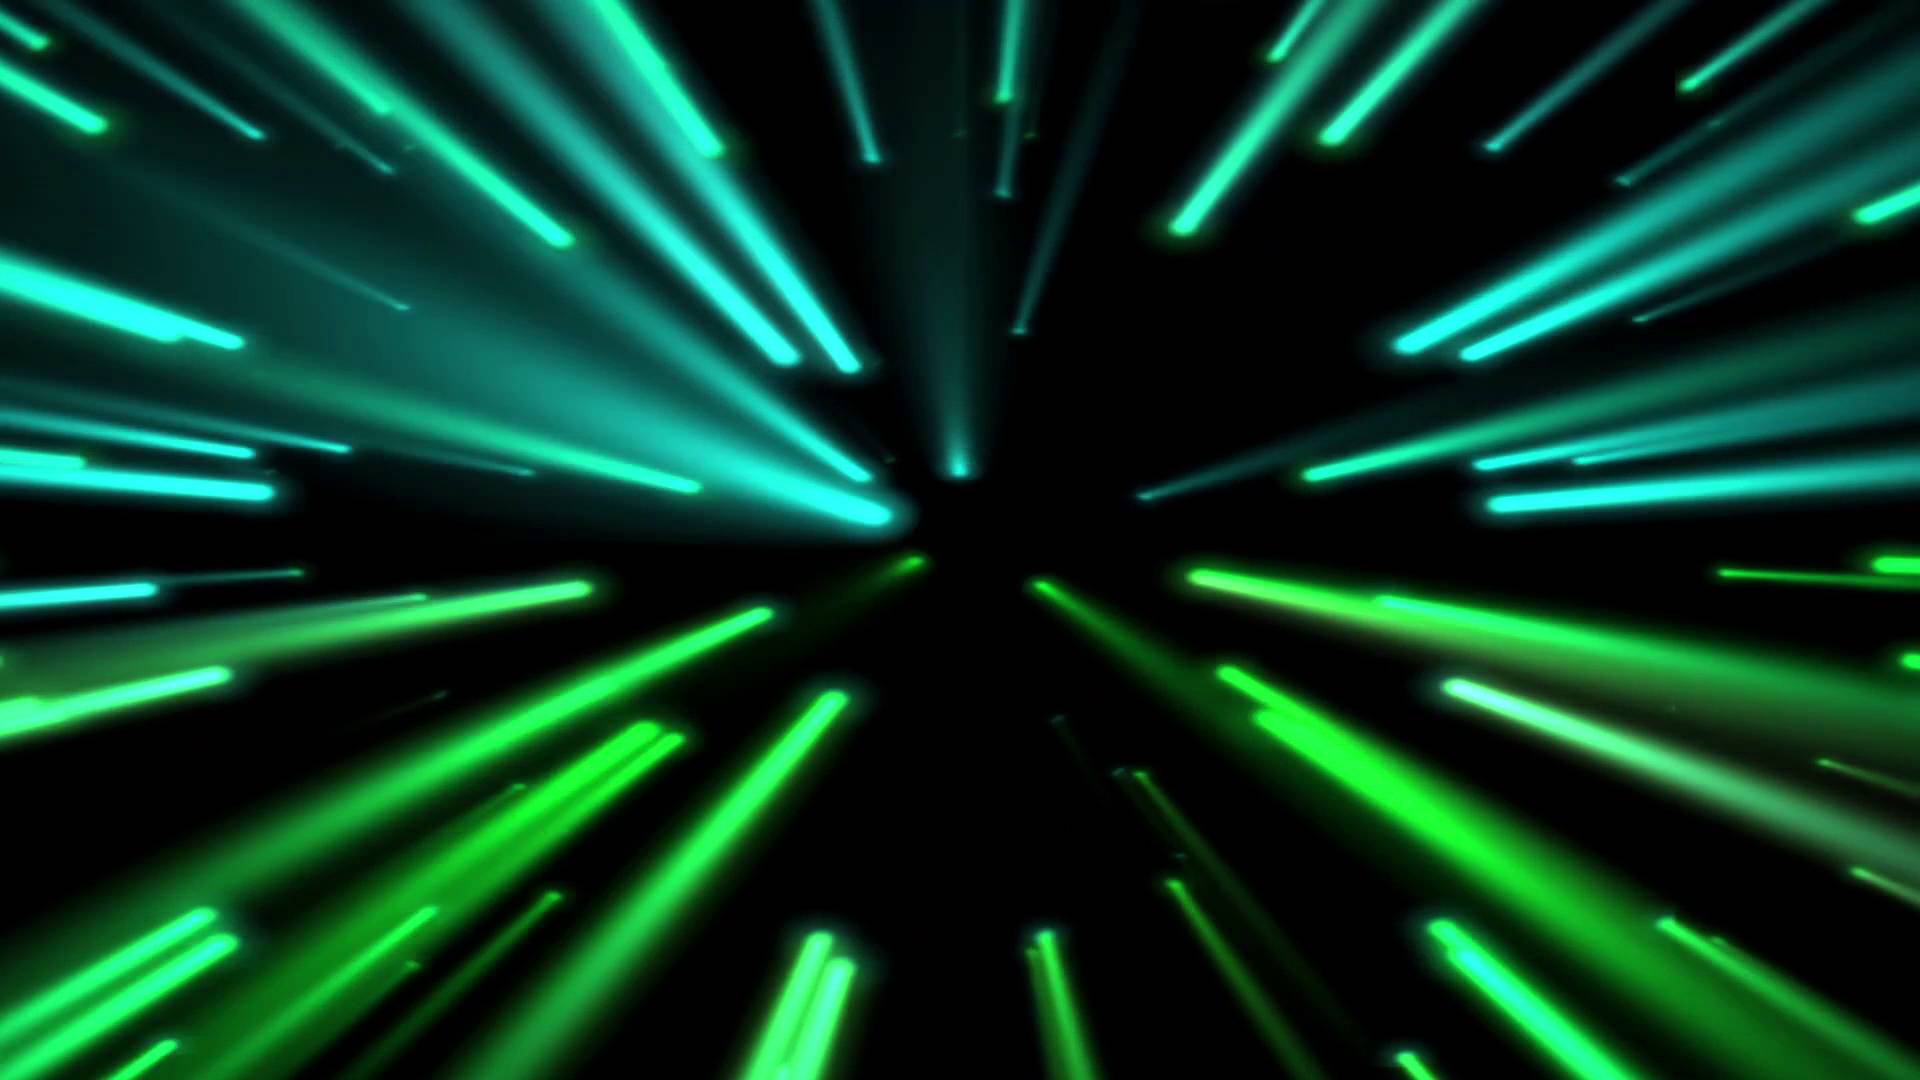 Club Lights Backgrounds - Wallpaper Cave